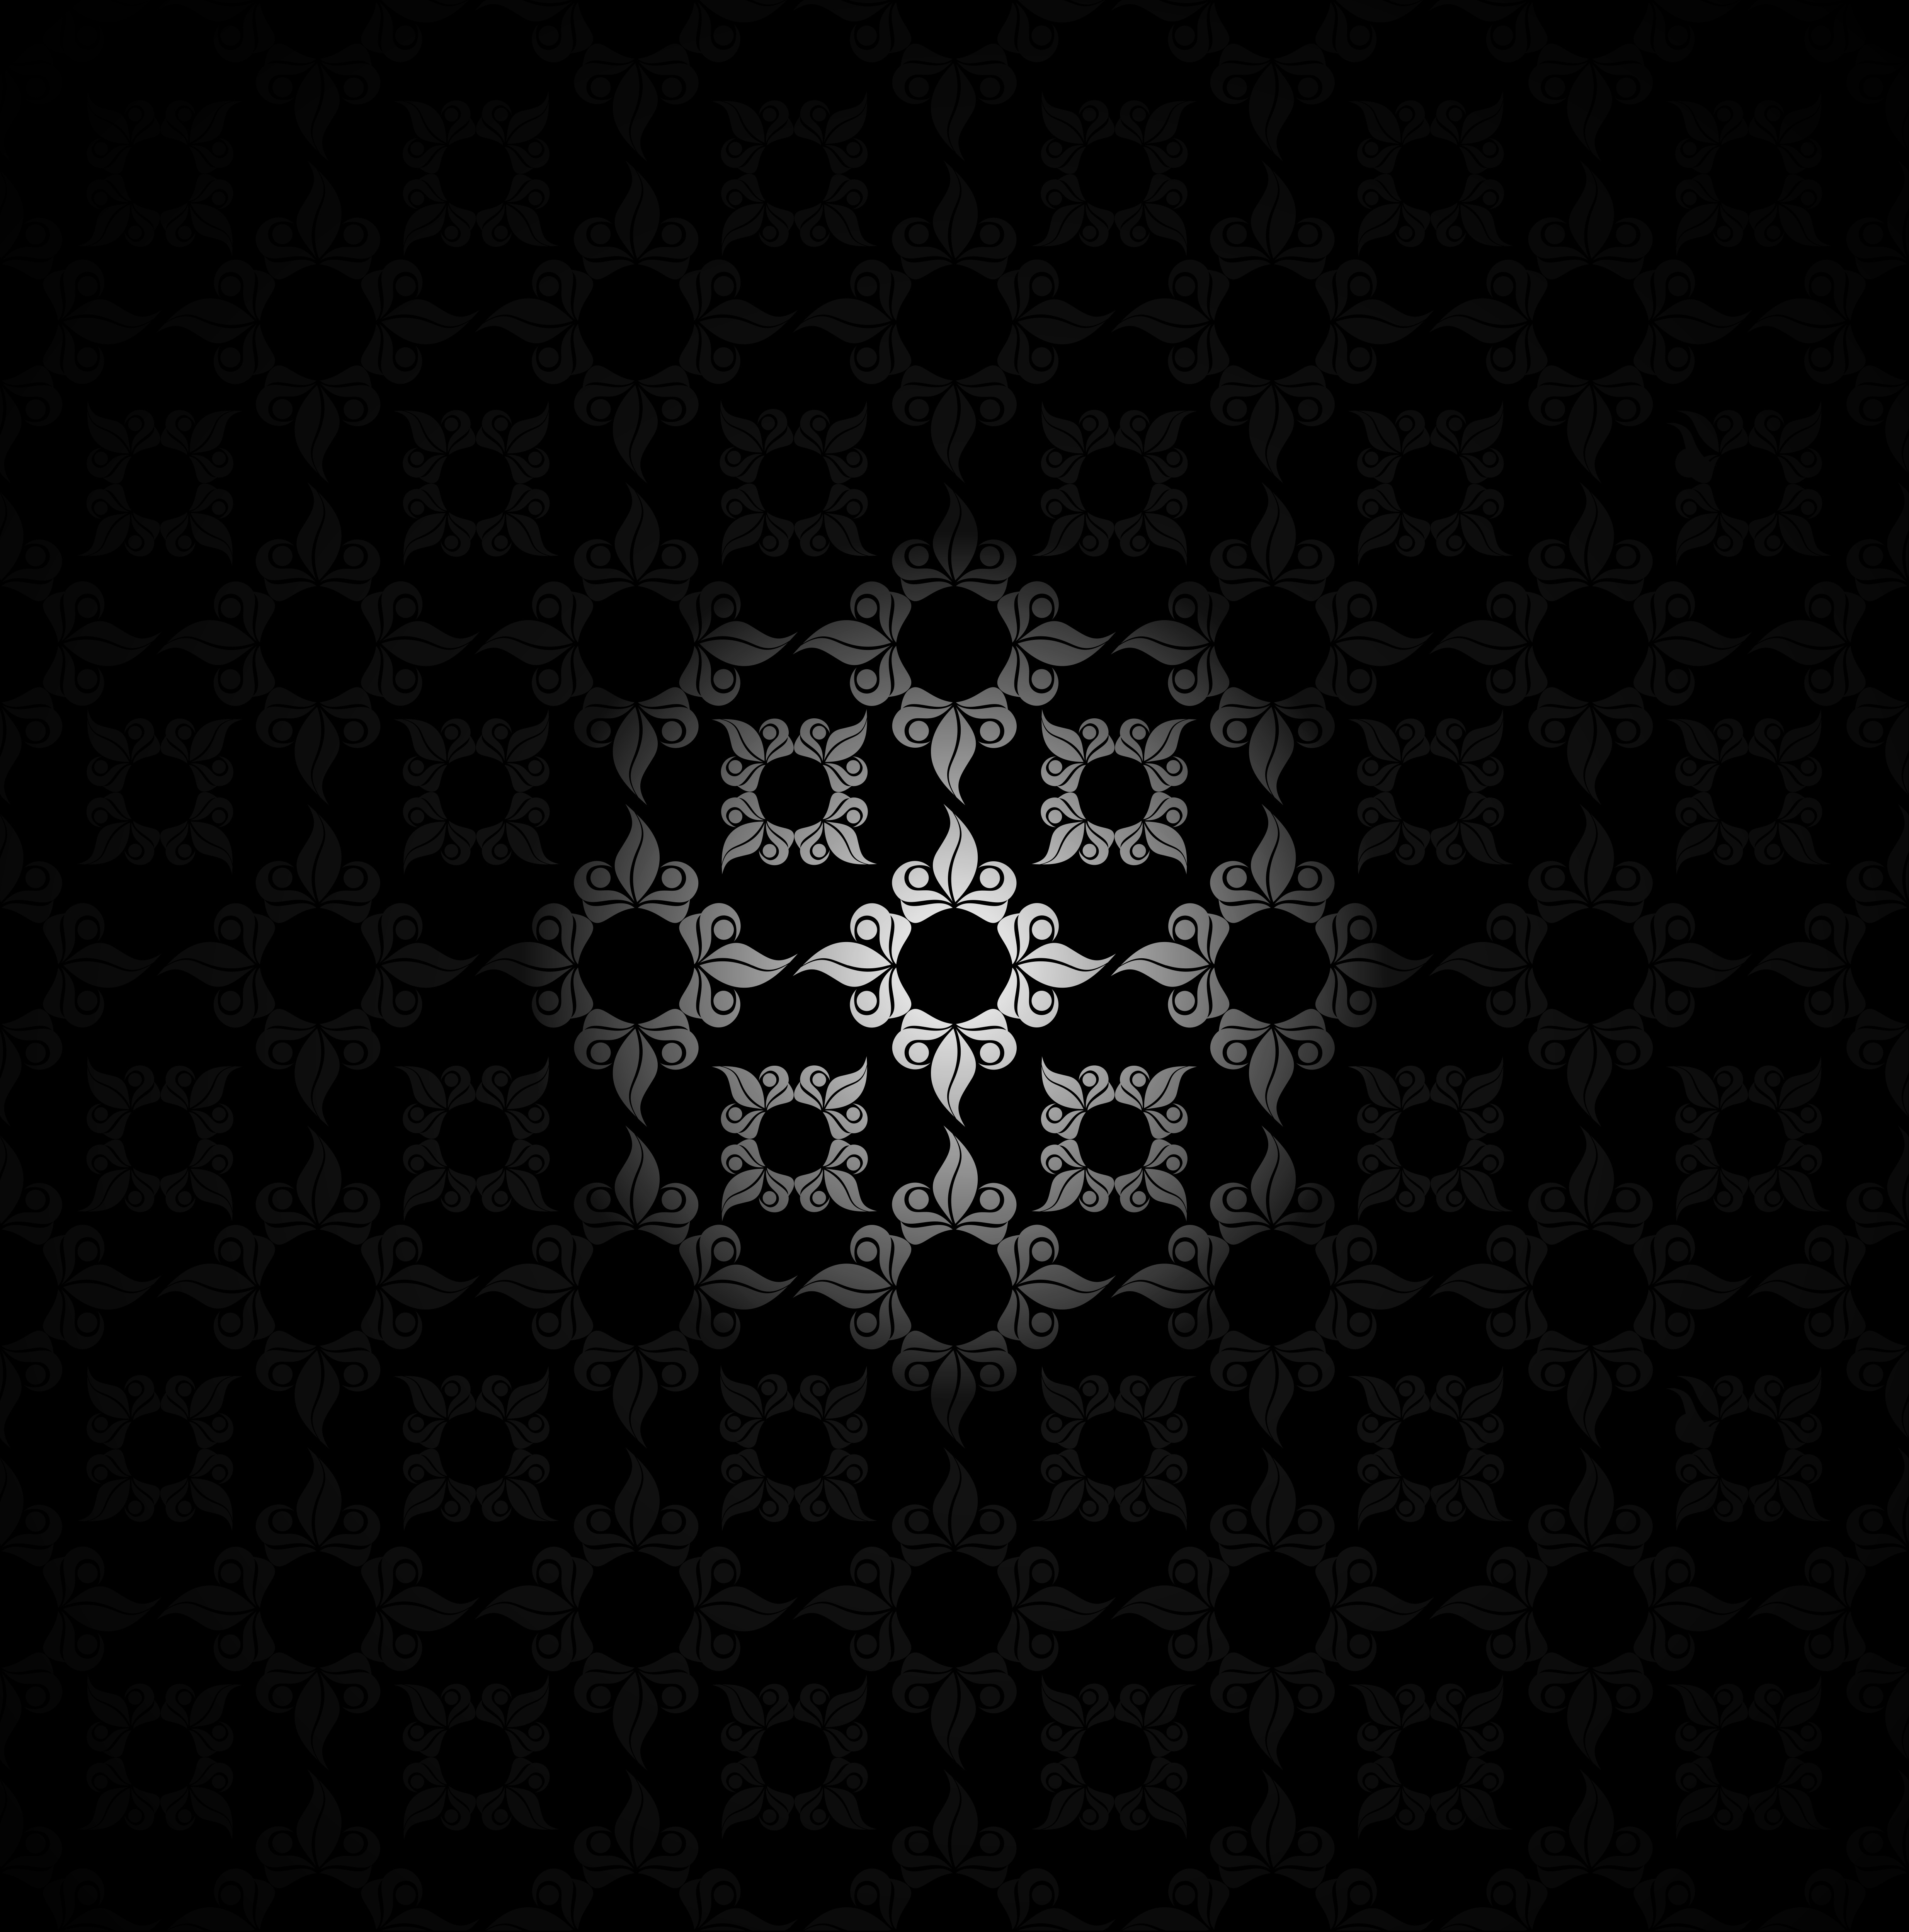 Baroque black and white design free image download